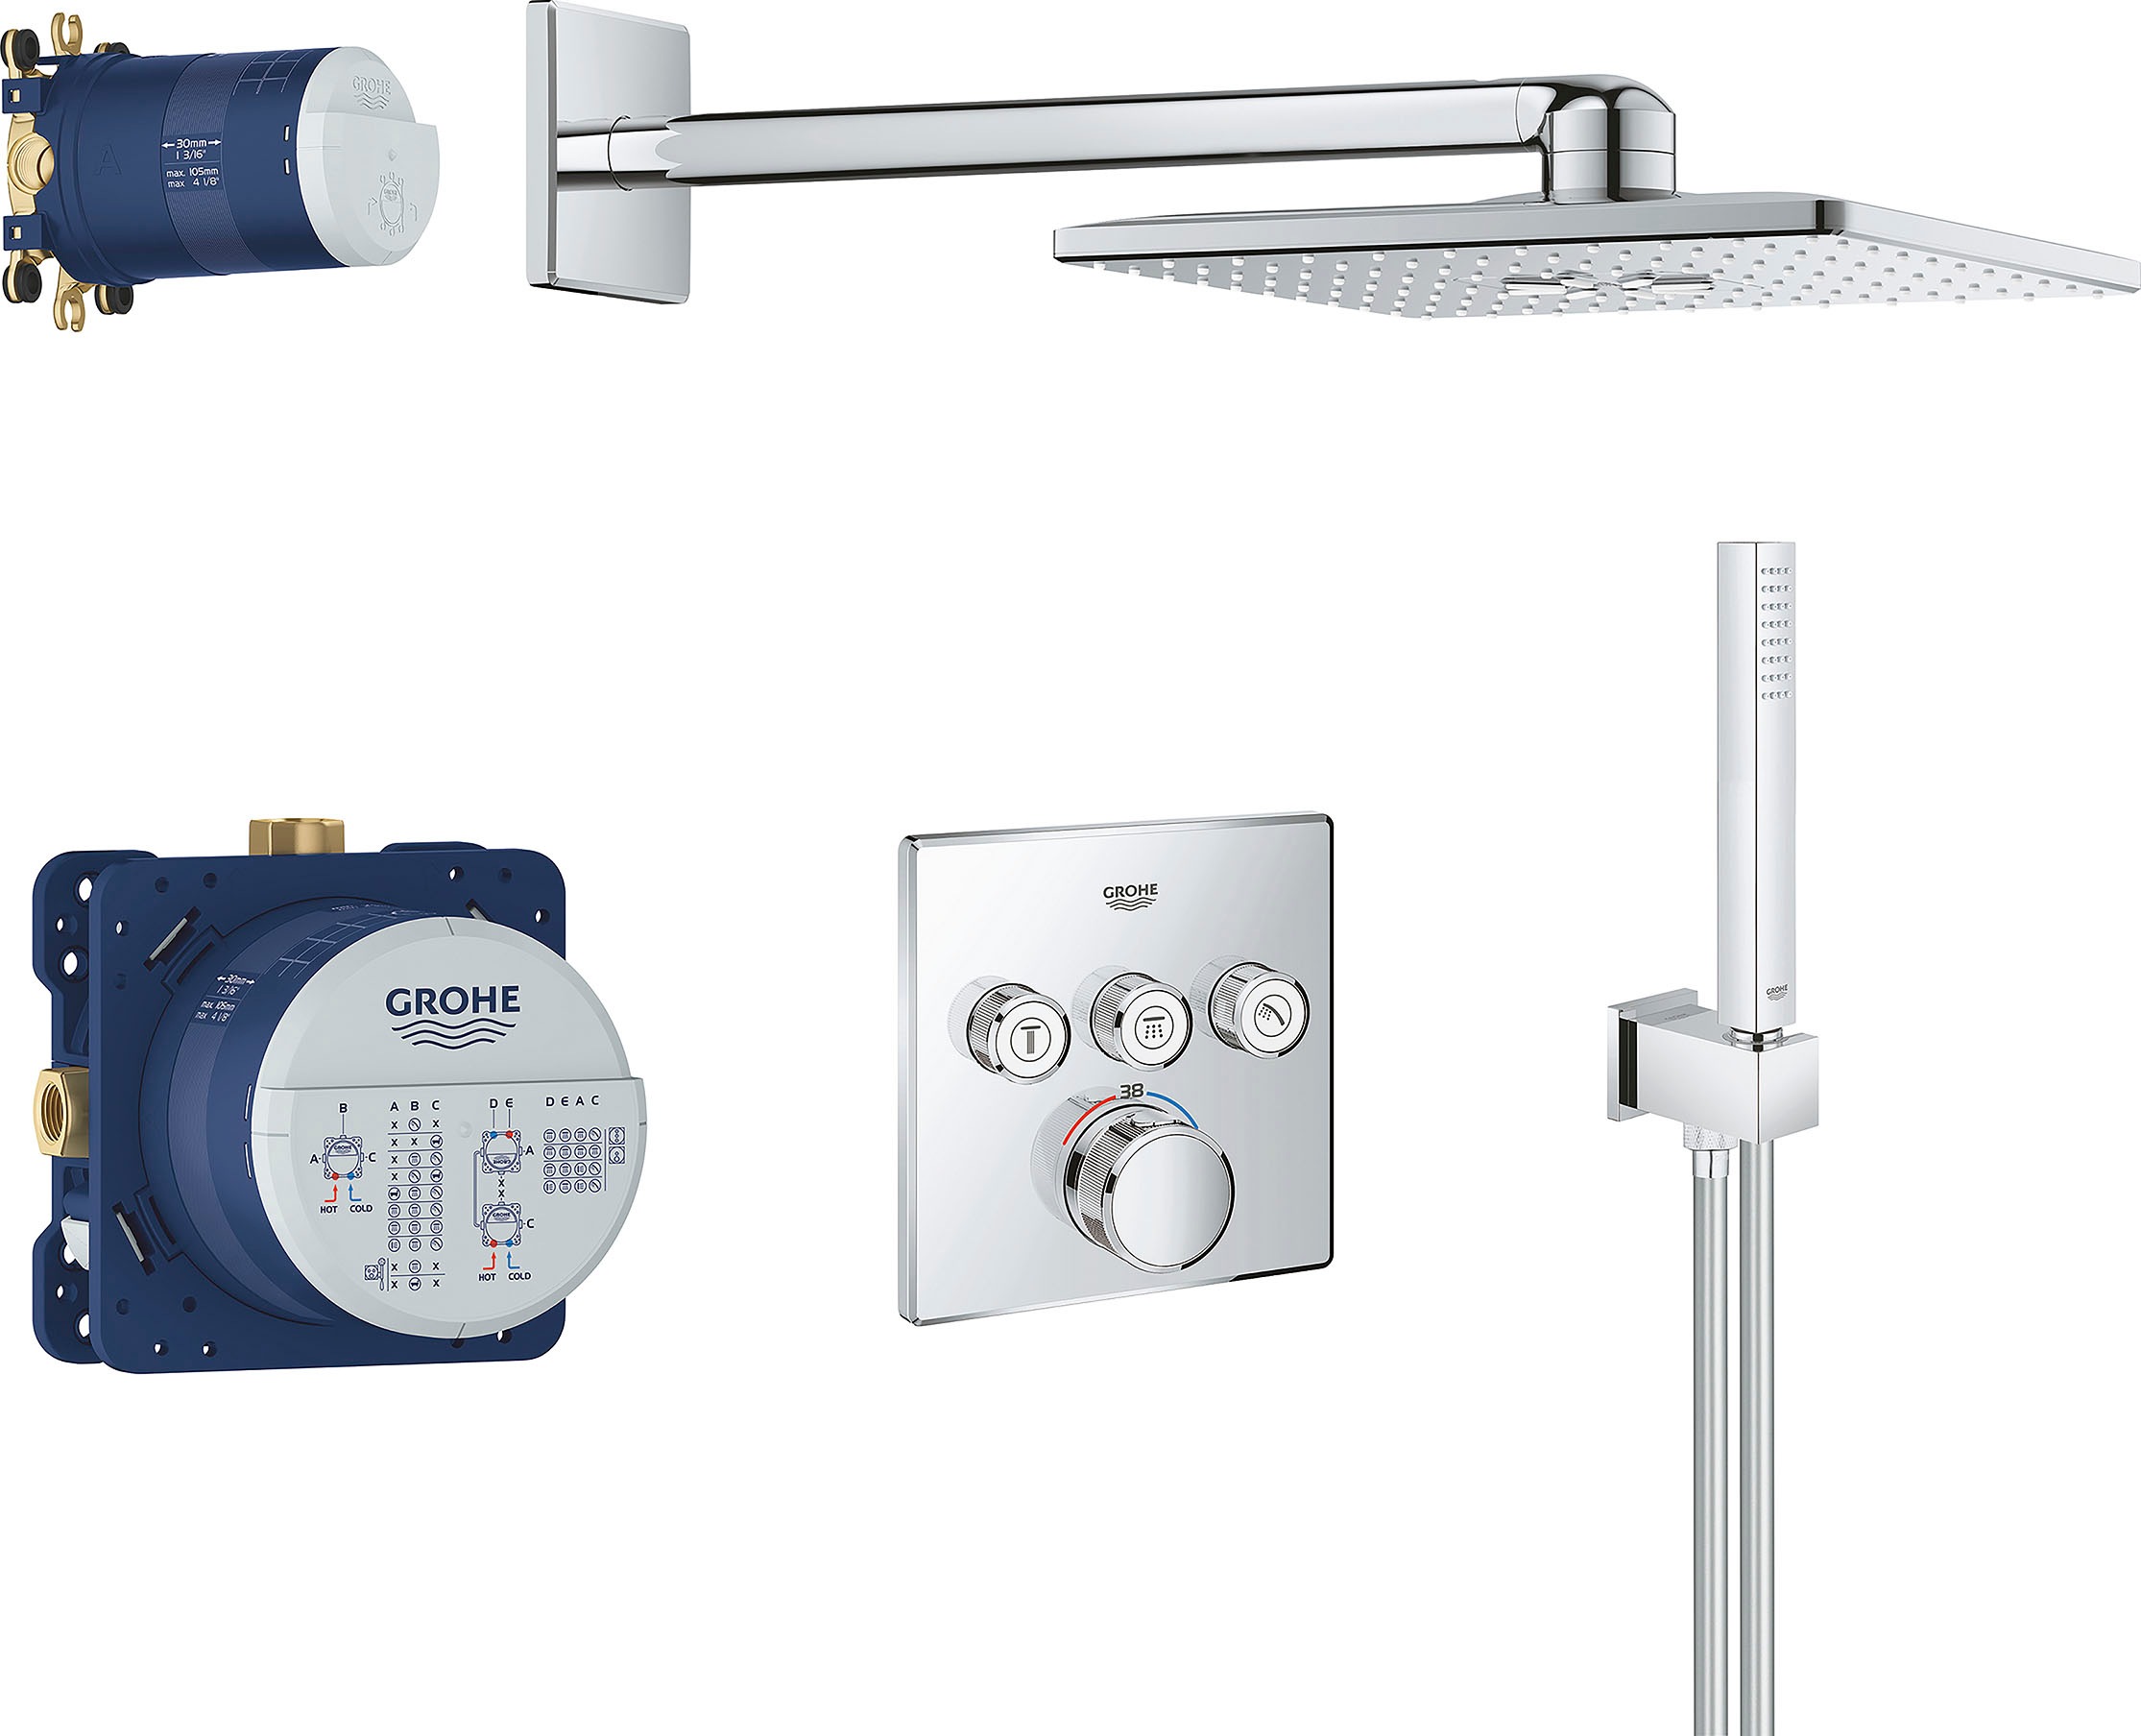 Grohe Duschsystem "Grohtherm", (Packung)